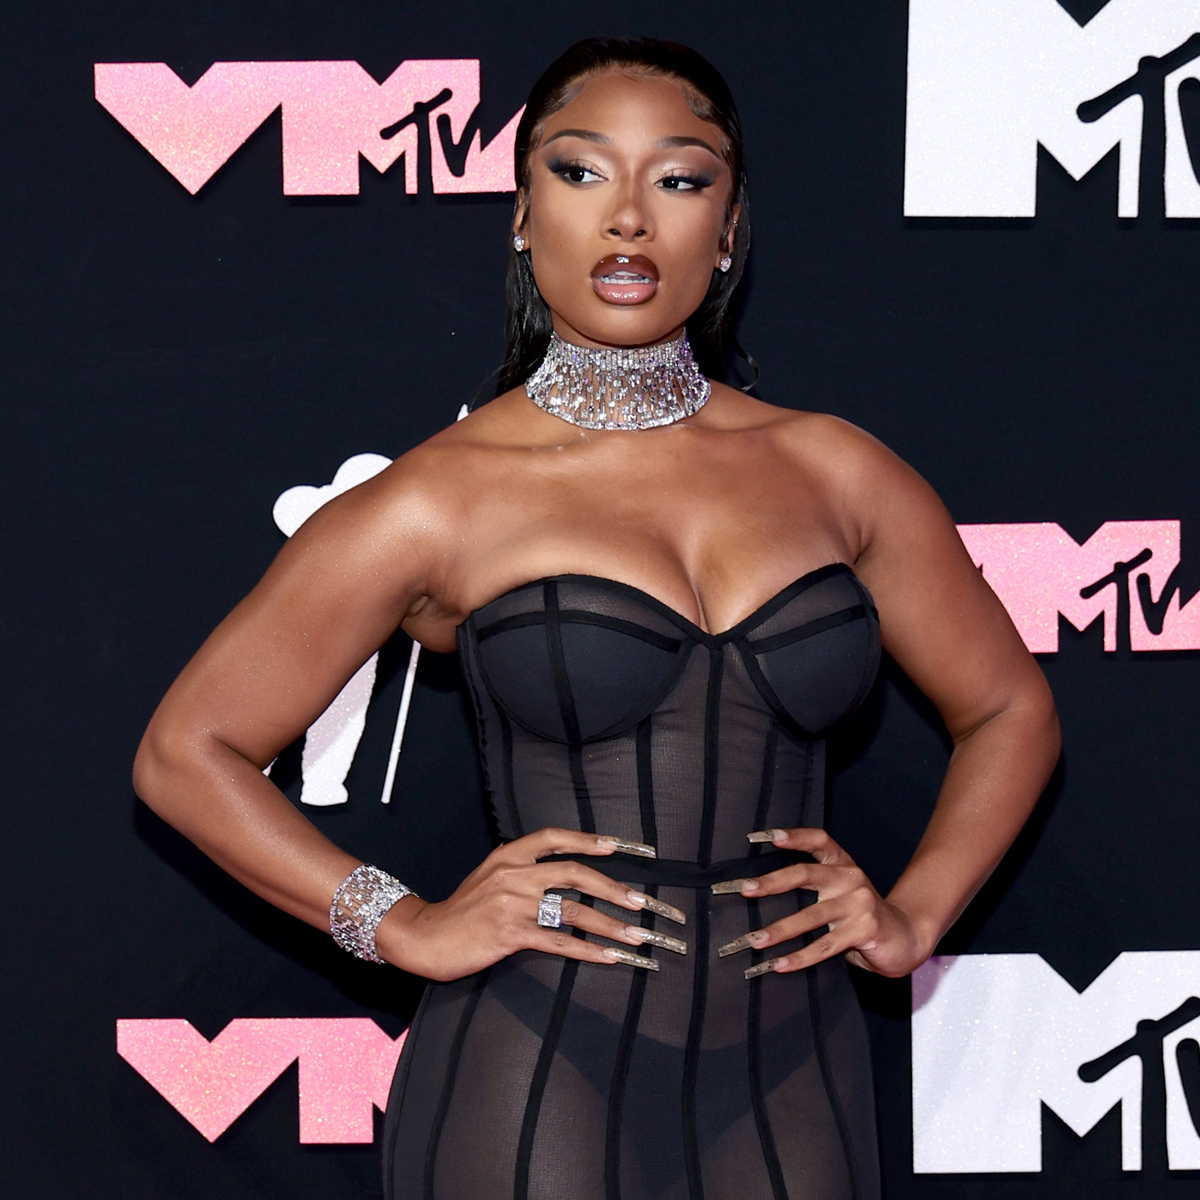 Megan Thee Stallion’s VMAs Look Proves Hot Girl Summer Is Here to Stay